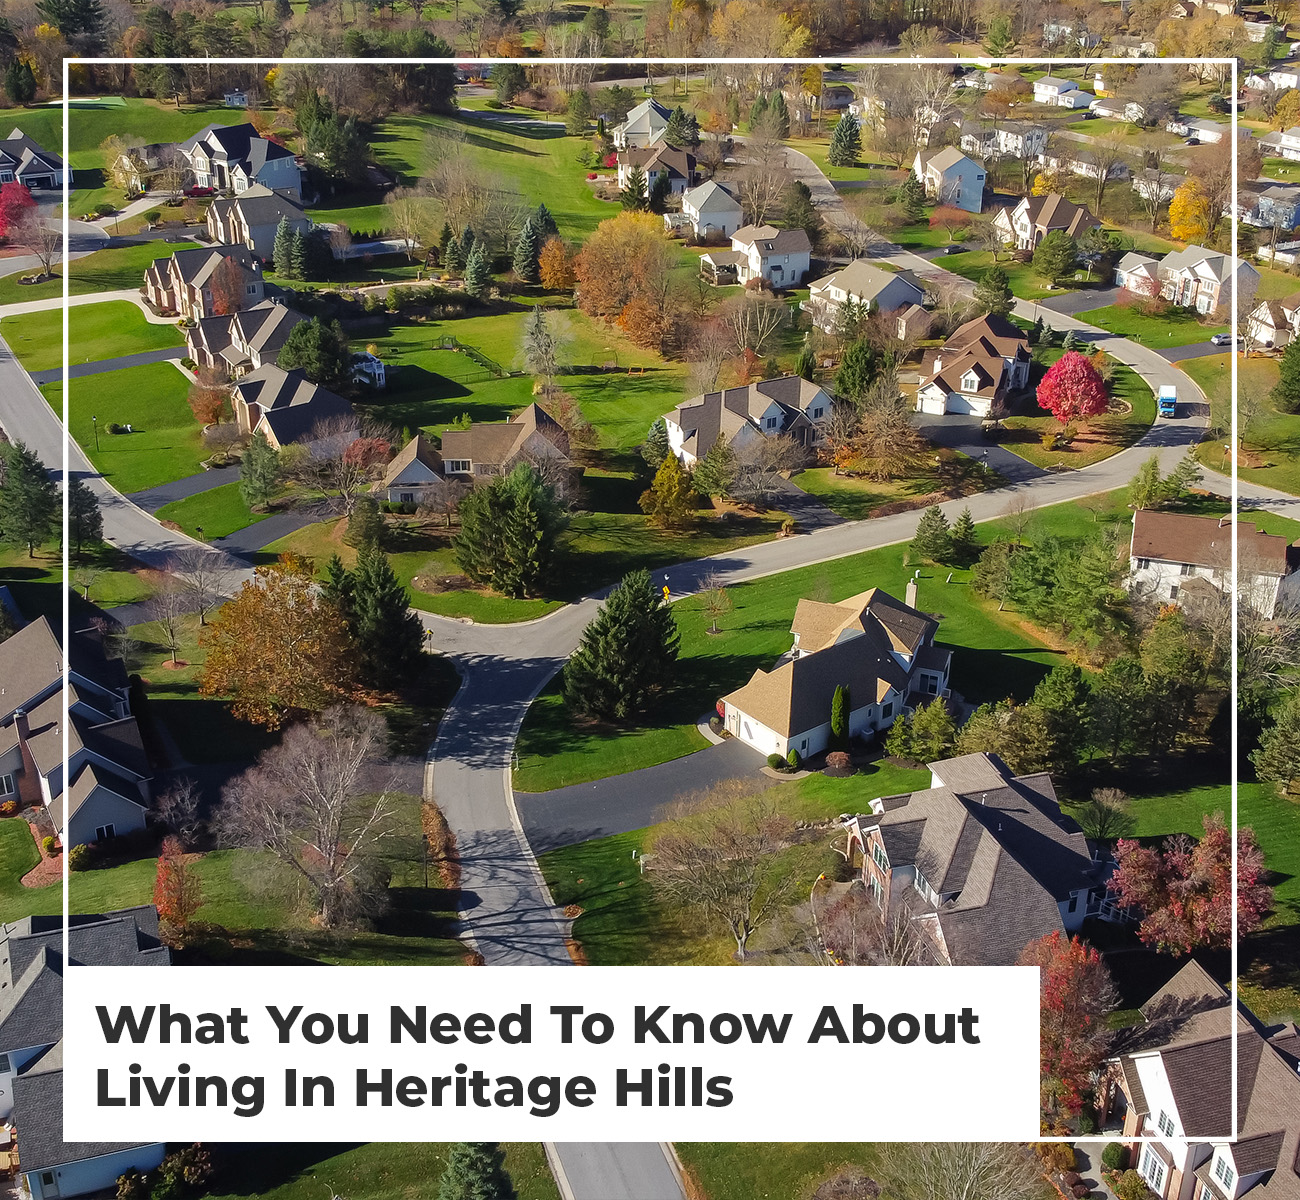  What You Need To Know About Living In Heritage Hills